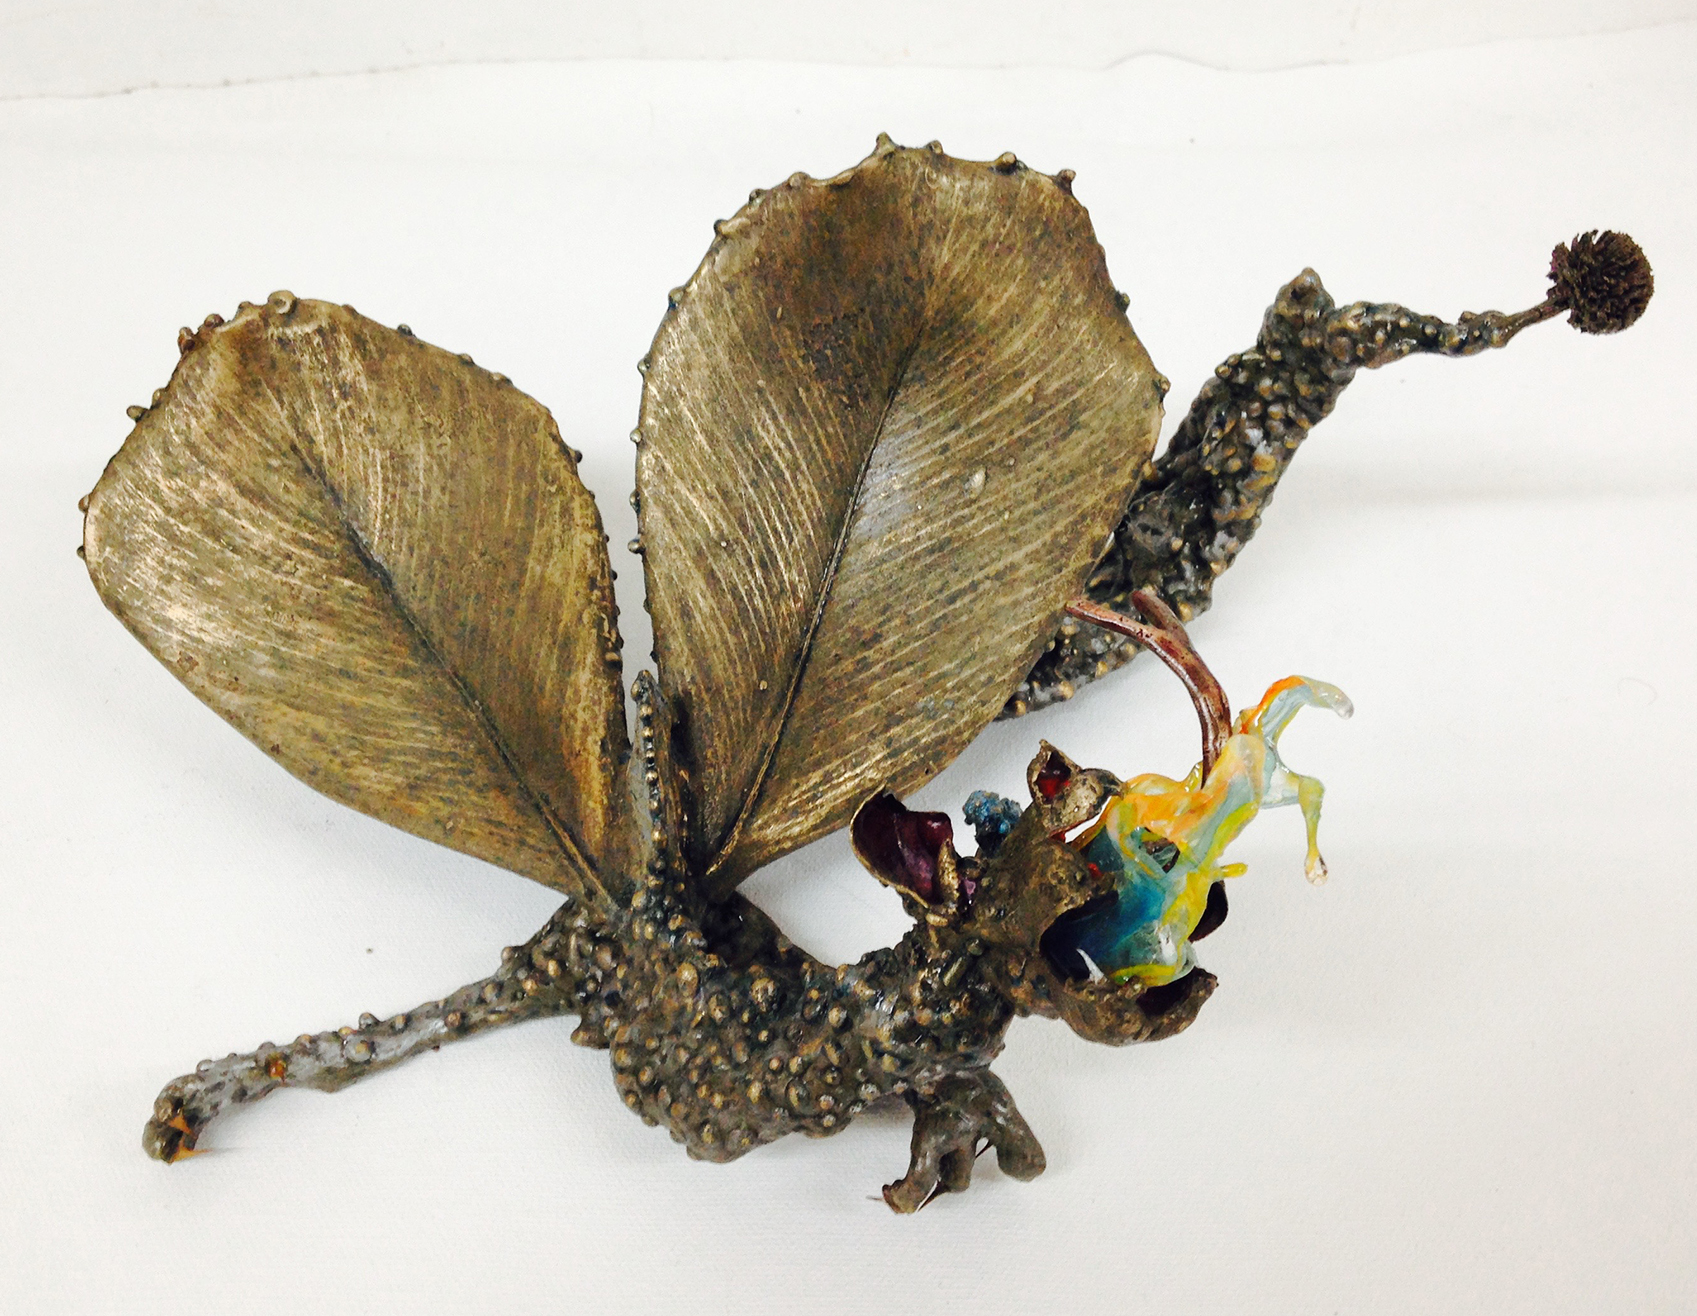  “Fairy Dragon" Free standing Bronze sculpture with mixed media. H 4.5" x W 11.5" x L 7" $5,000.00    